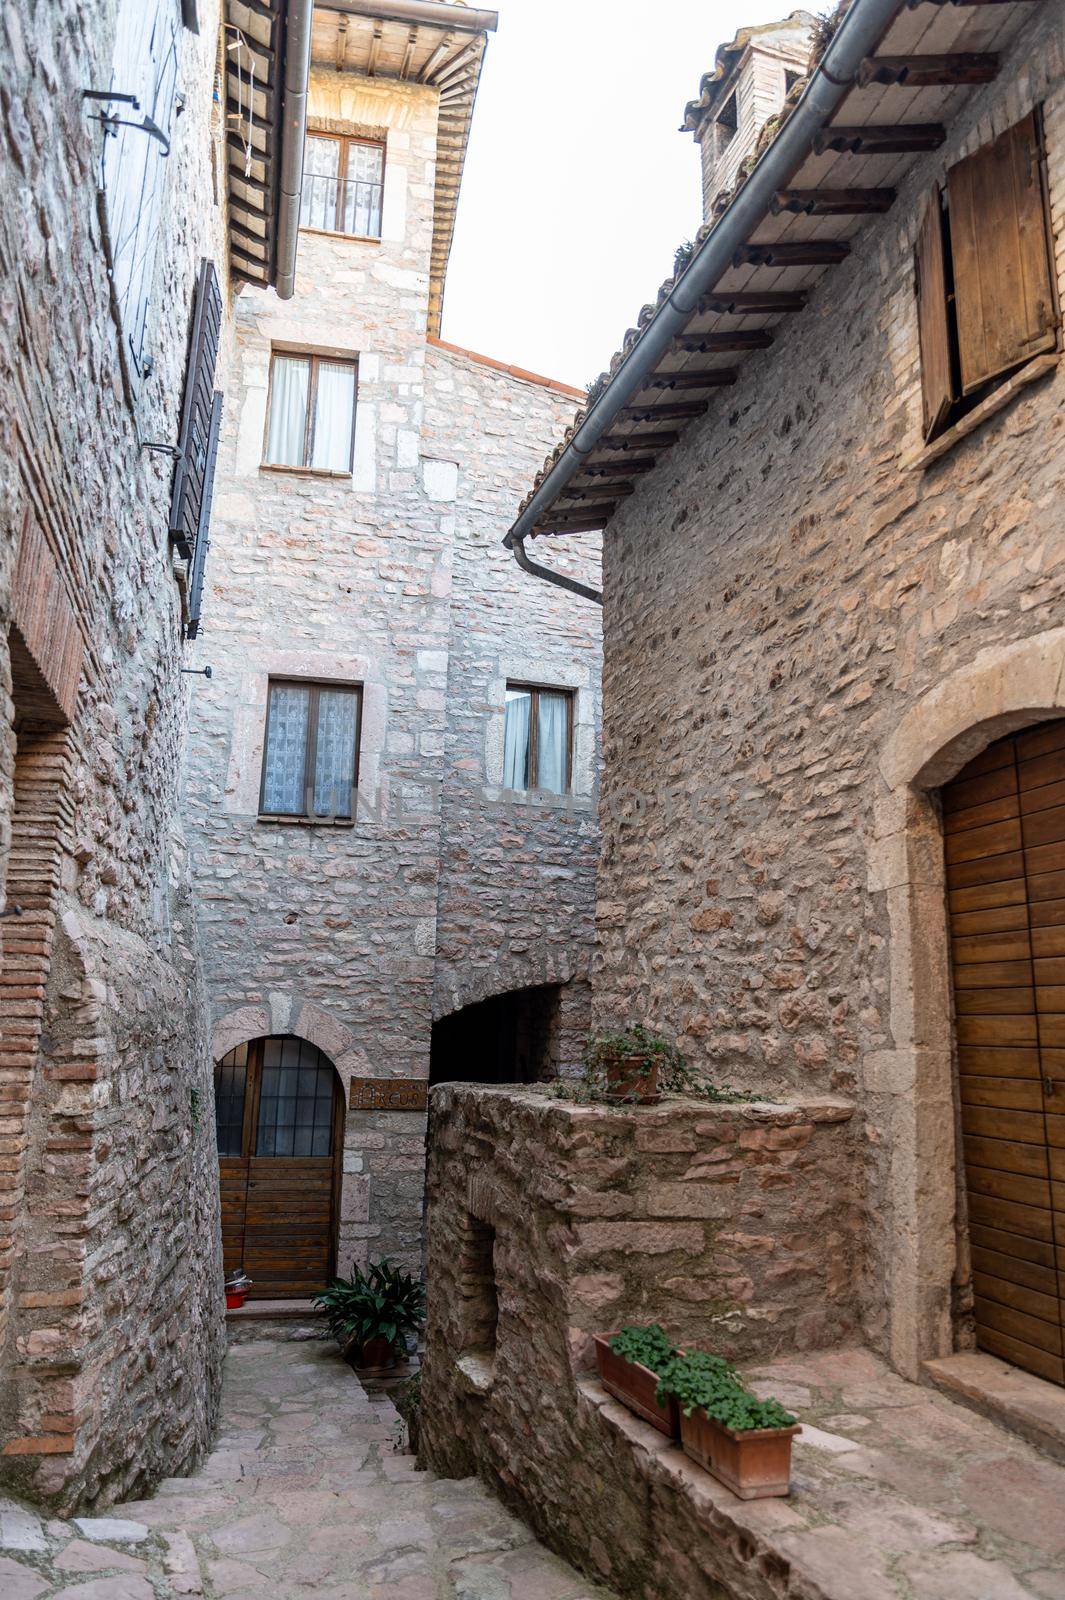 hamlet of macerino its buildings and rustic alleys by carfedeph